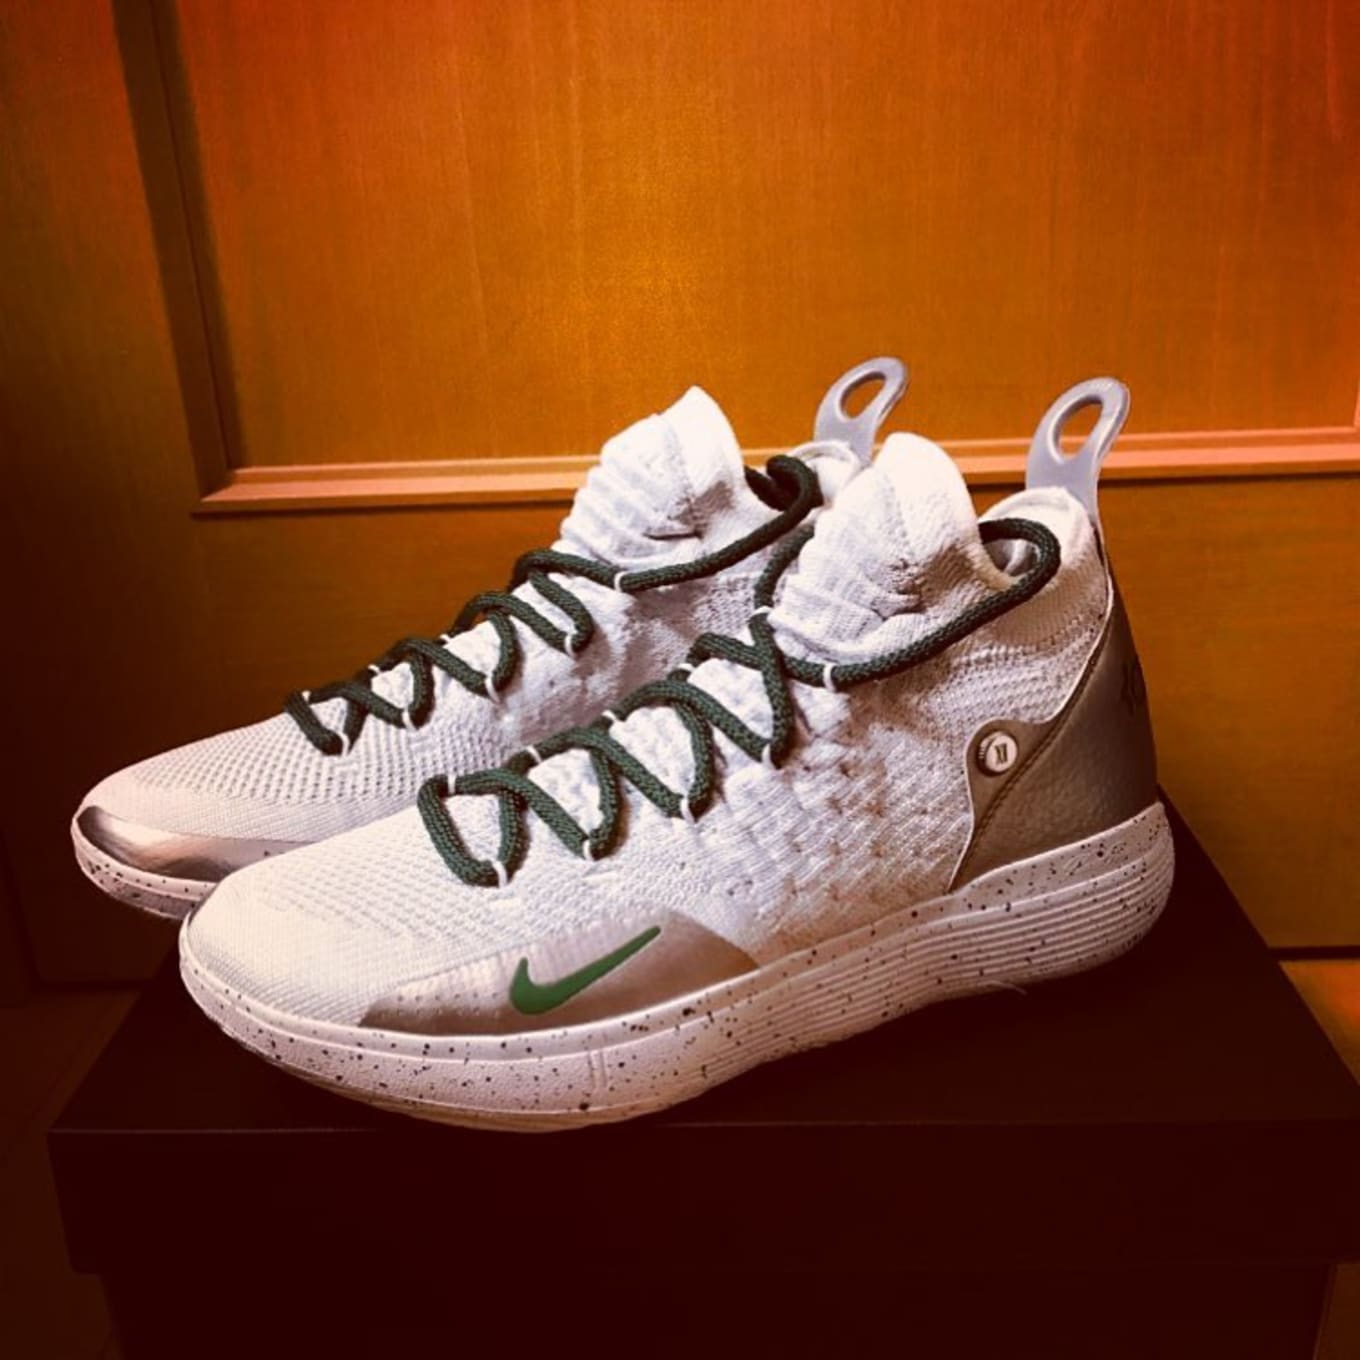 NIKEiD By You KD 11 Designs | Sole 